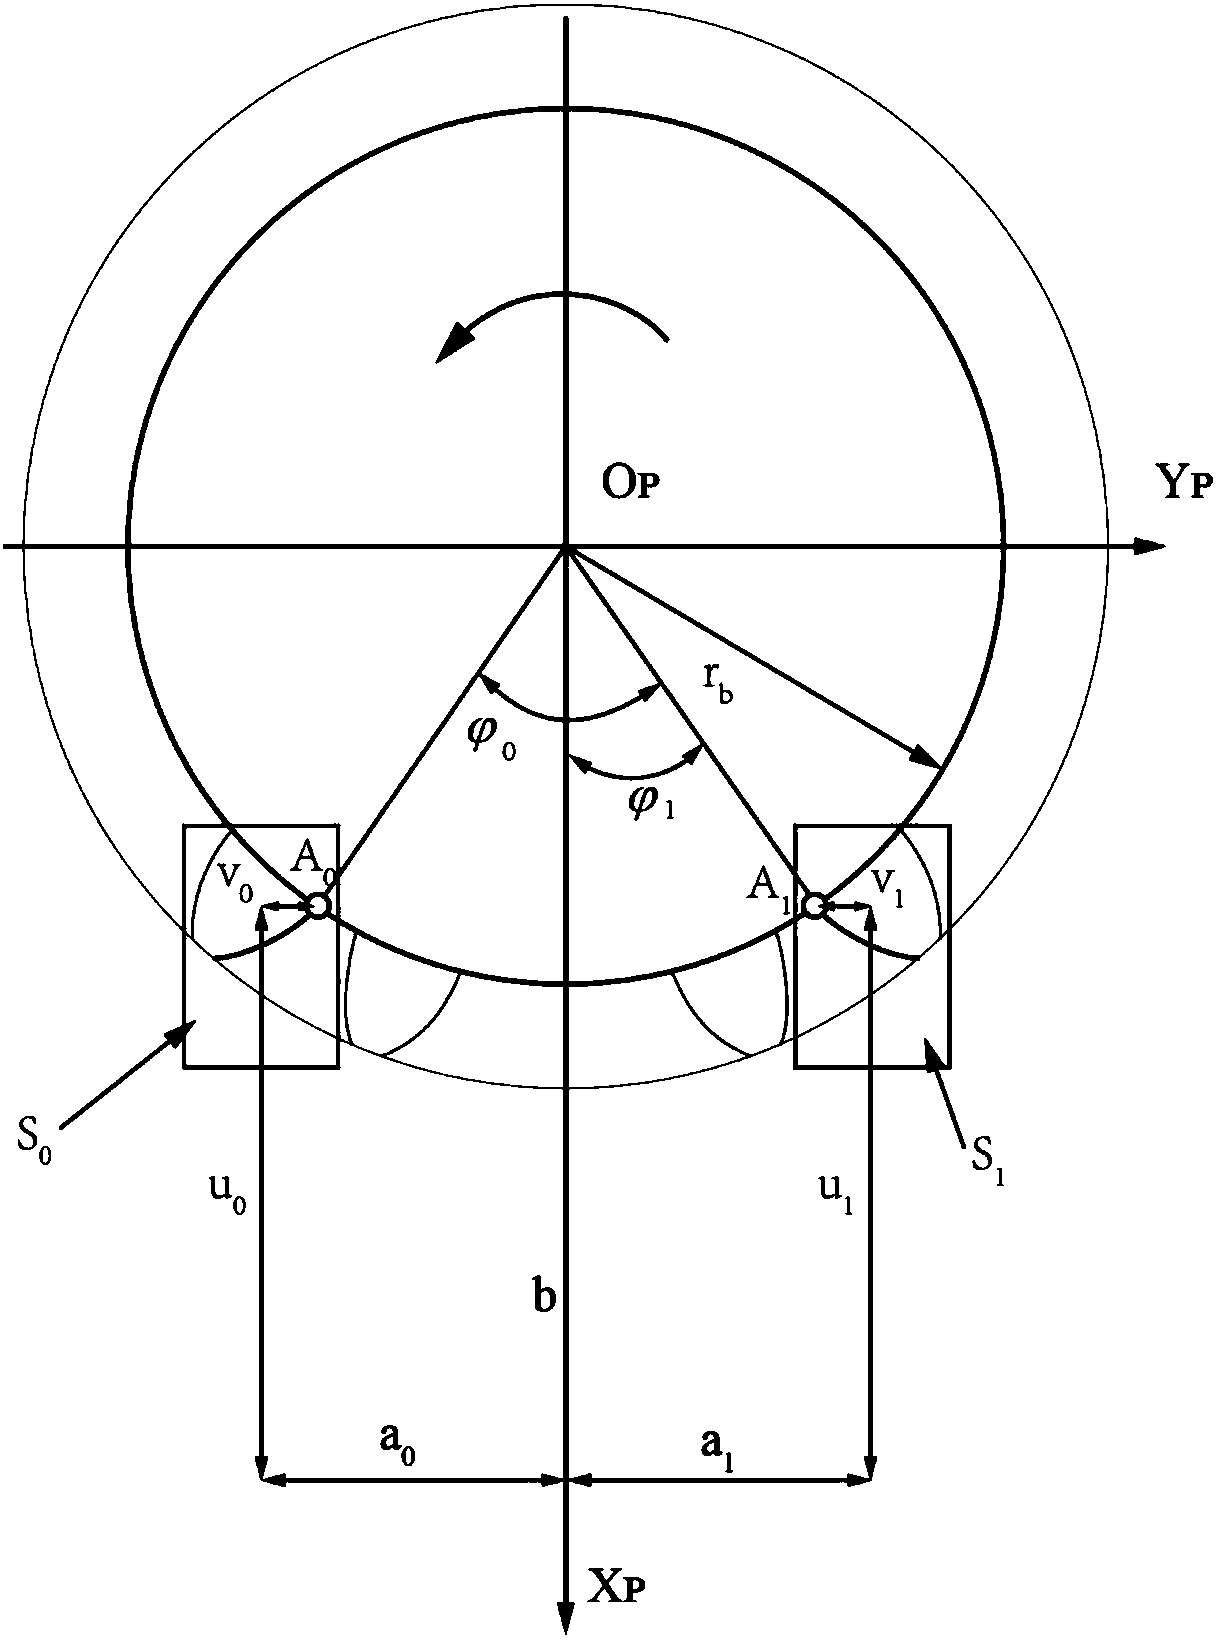 Method for measuring pitch deviation of cylindrical gear based on linear structured light